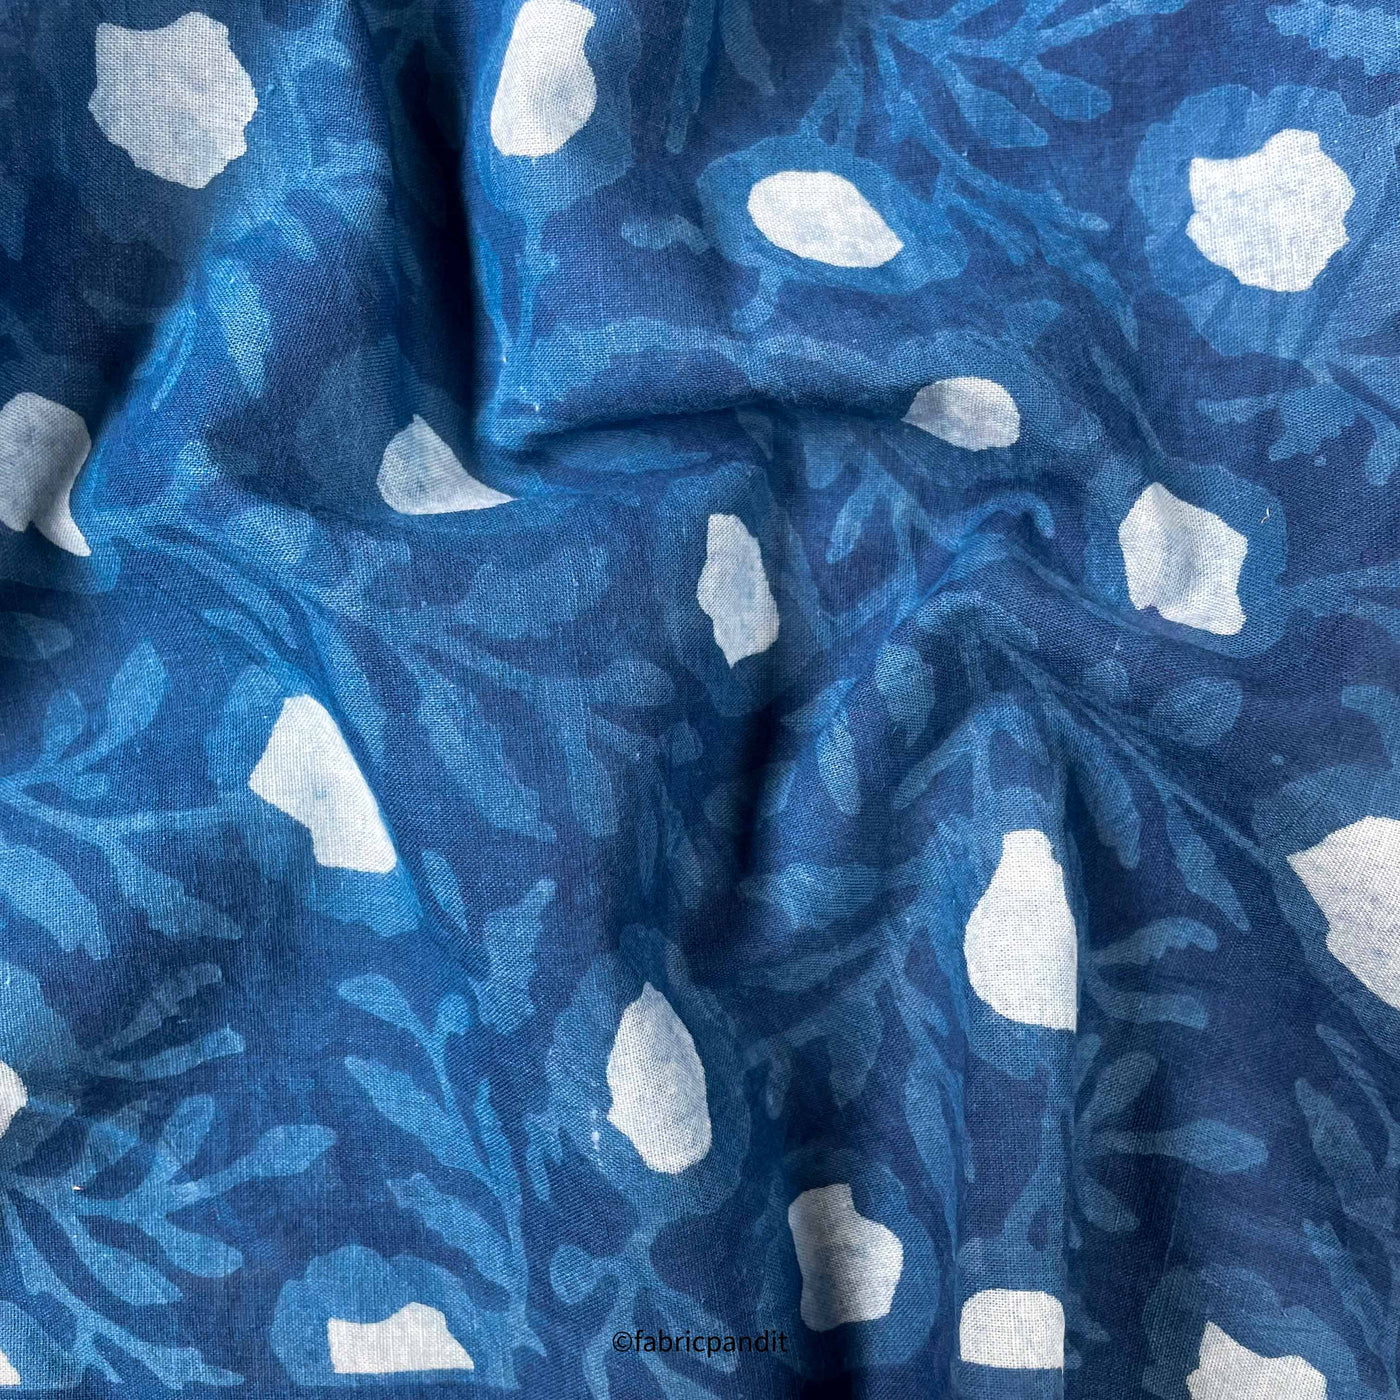 Fabric Pandit Fabric Indigo Dabu Natural Dyed Floral Vines Hand Block Printed Pure Cotton Modal Fabric (Width 42 inches)